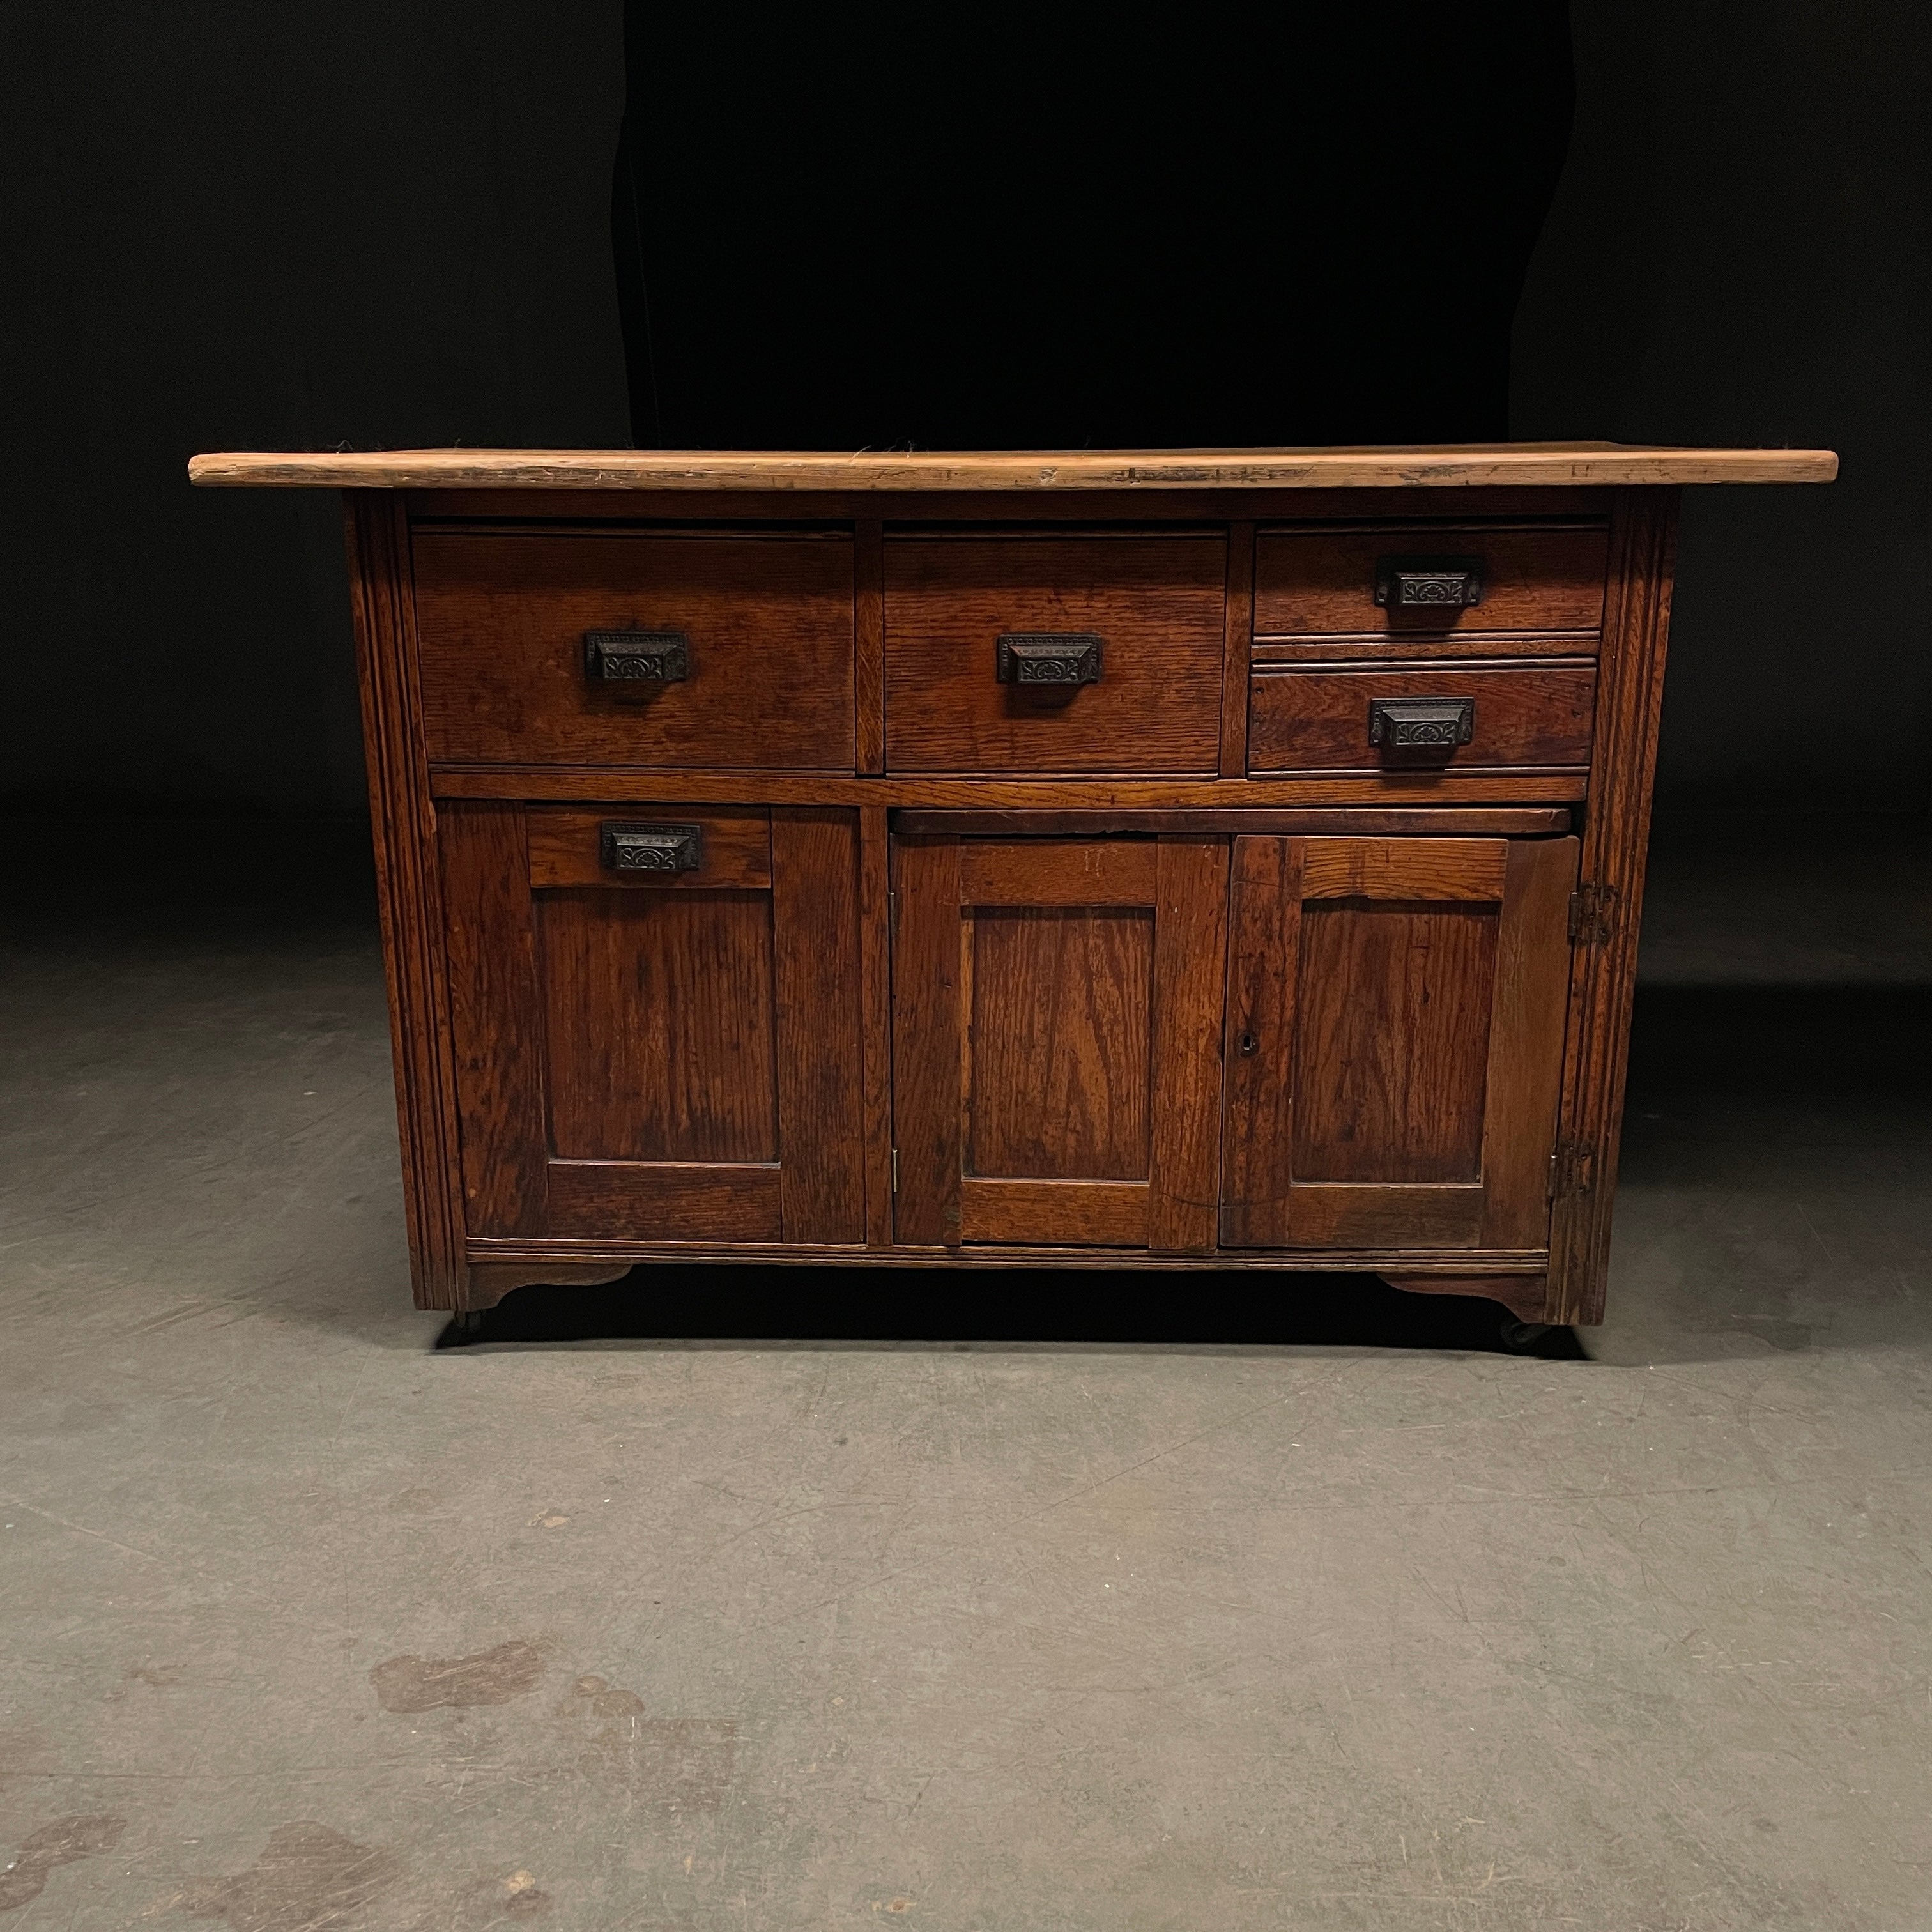 1890 country kitchen sideboard